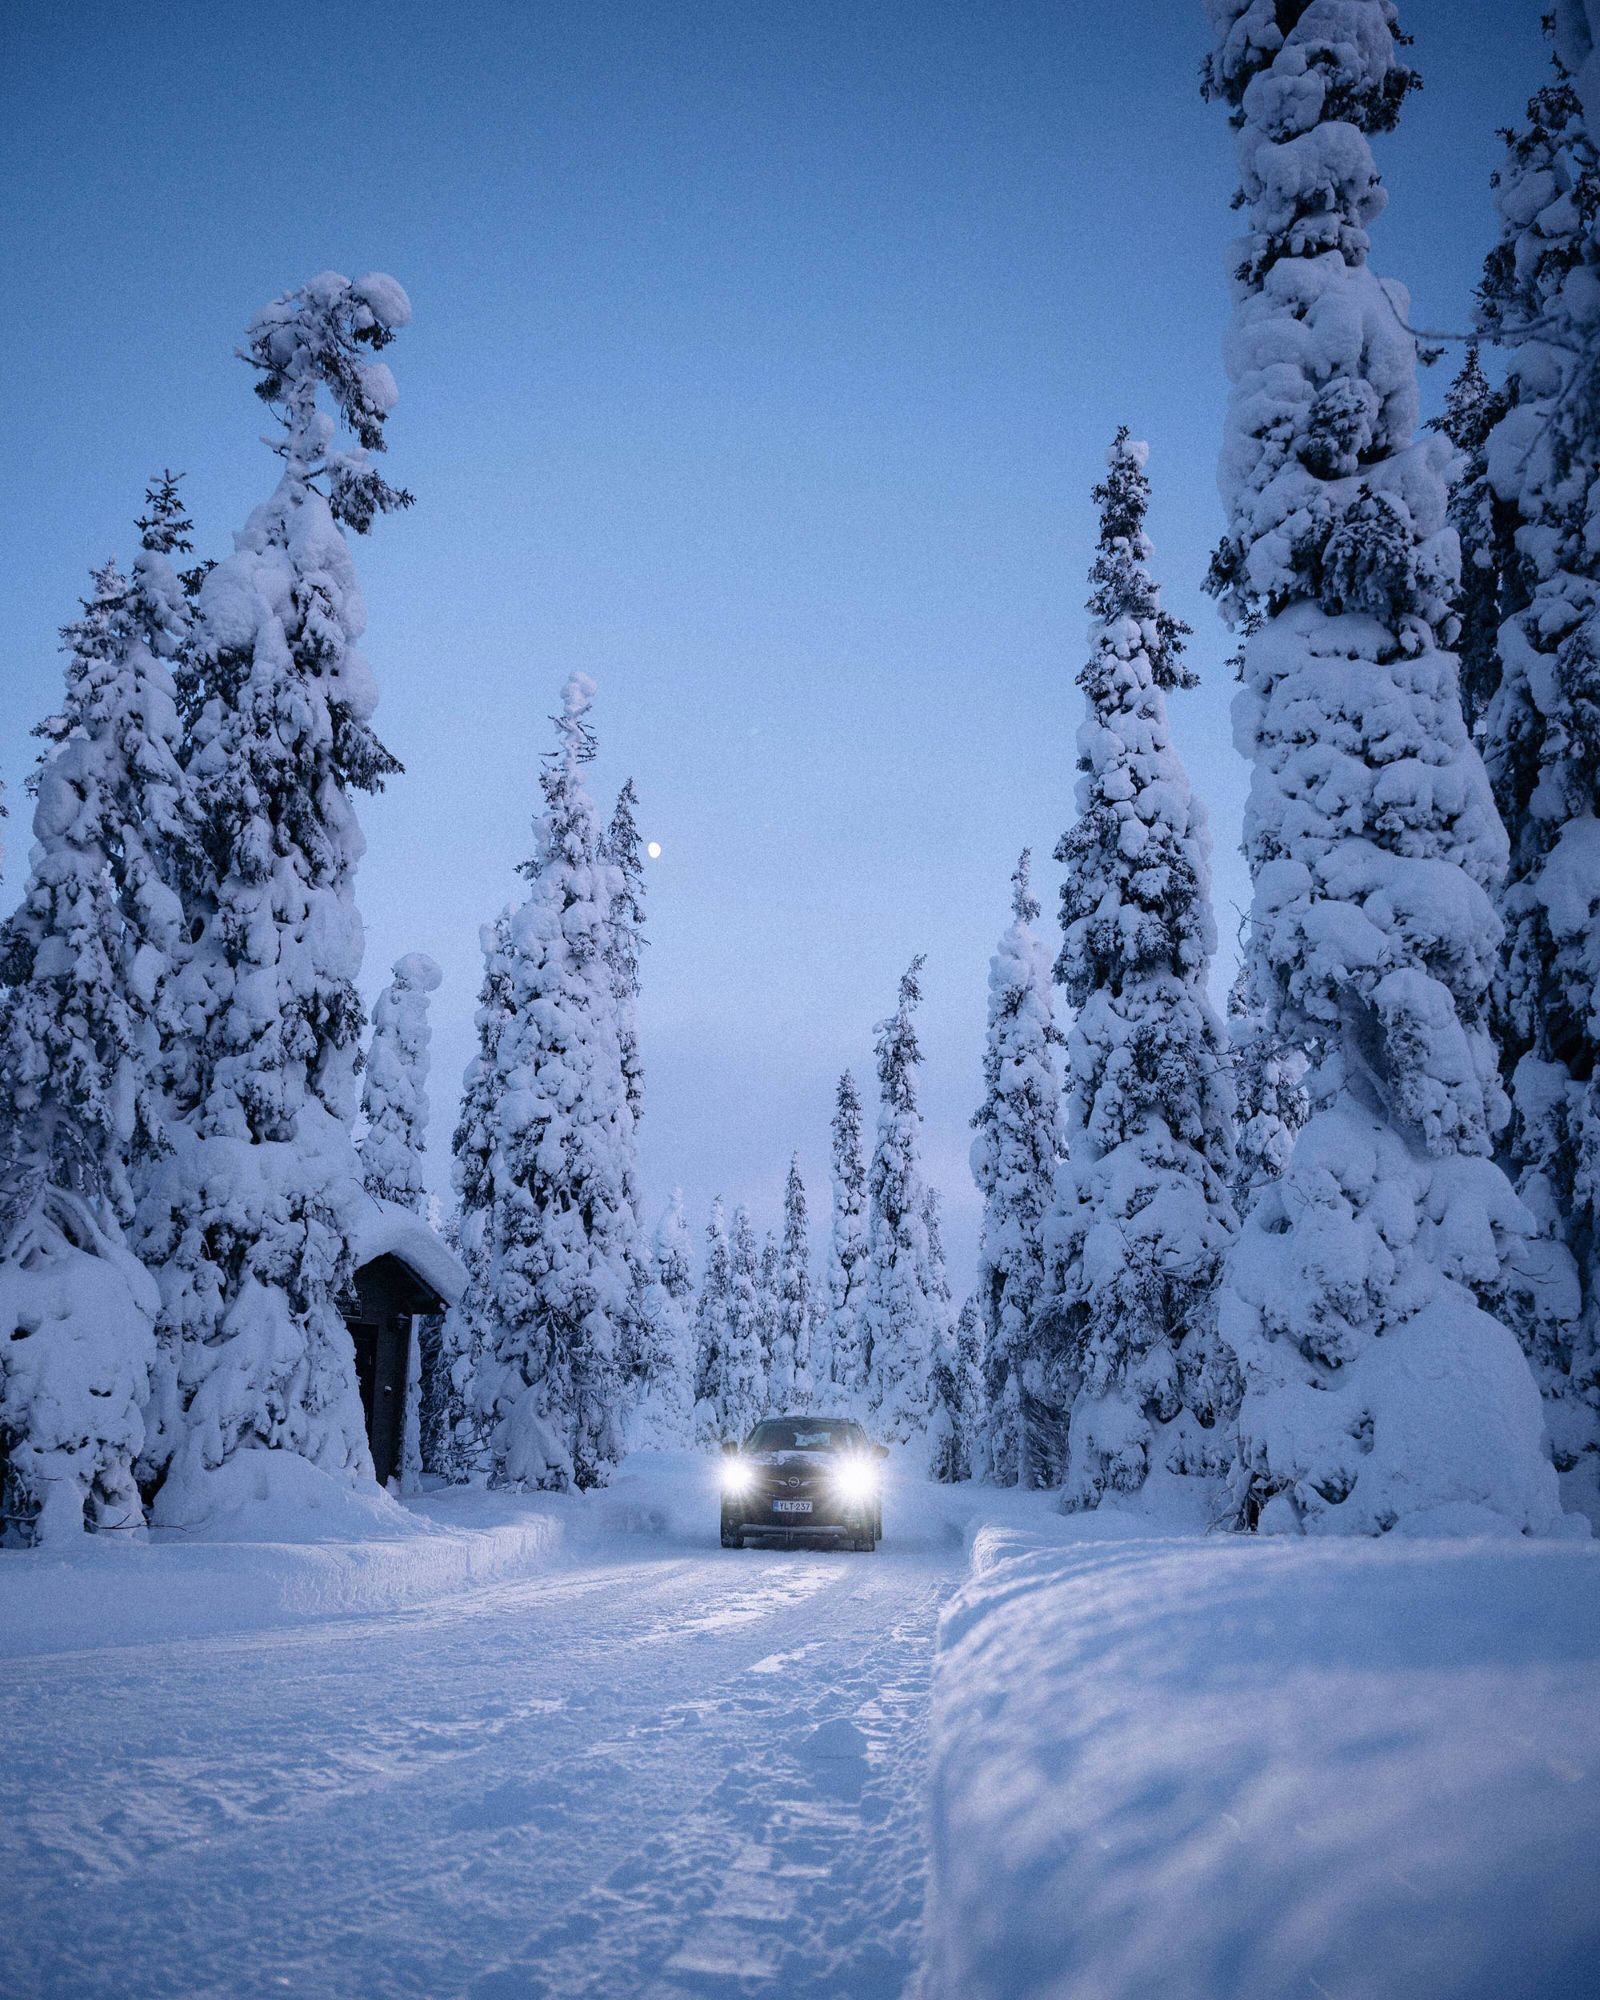 https://www.visitfinland.com/.imaging/mte/visit-finland-theme/xlUpW/dam/vf/Articles/Everything-to-know-about-snow/Finland_Lapland_AndreAlexander_DSC_0847_optimized.jpg/jcr:content/Finland_Lapland_AndreAlexander_DSC_0847_optimized.jpg